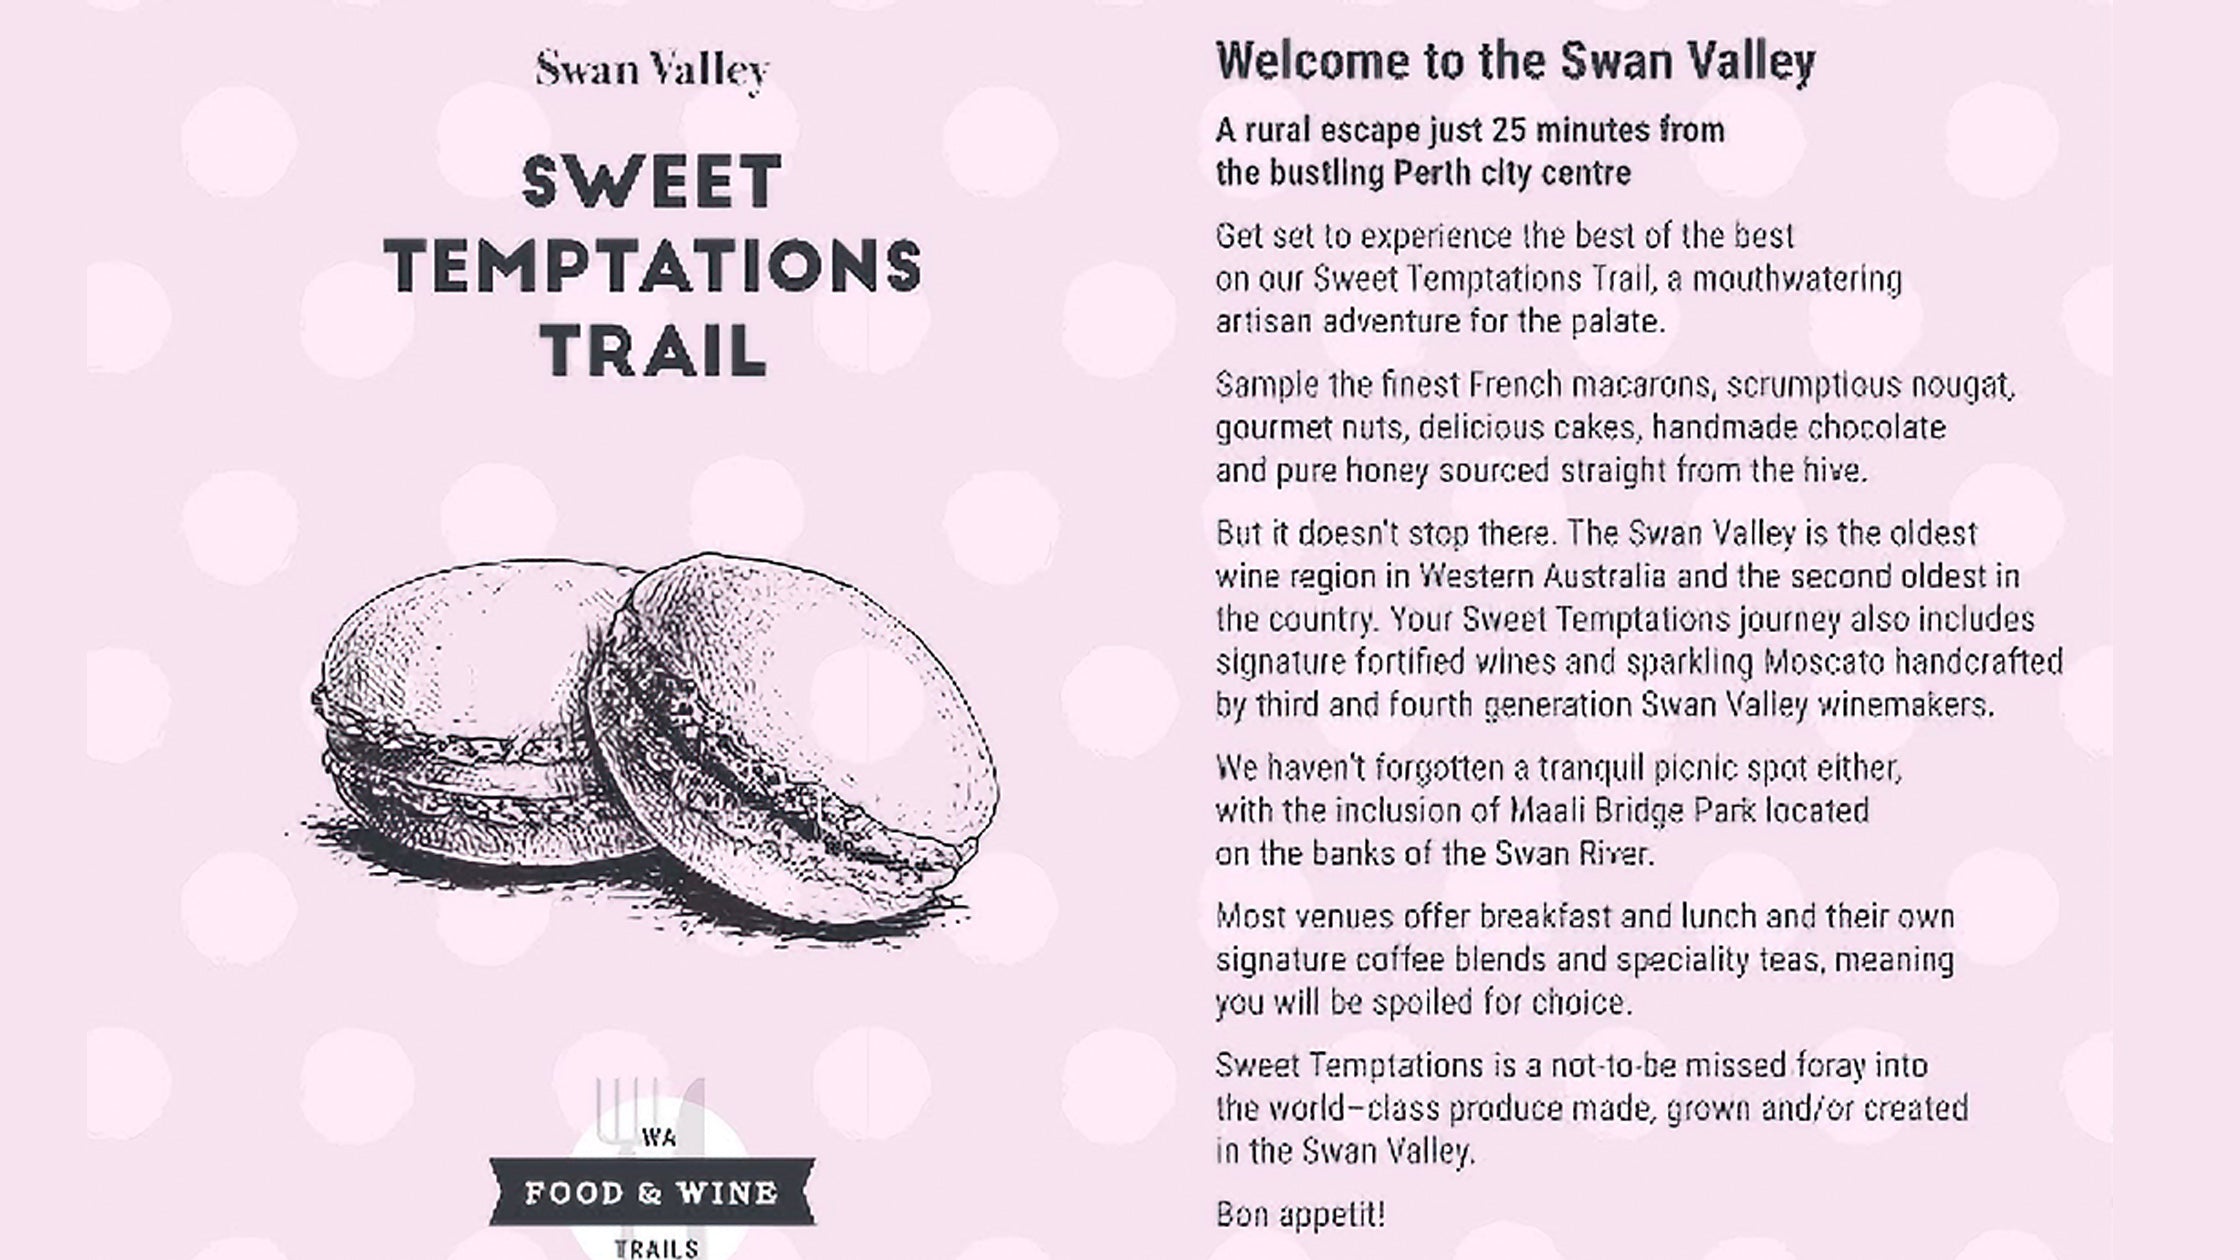 Have you heard what’s new in Swan Valley?